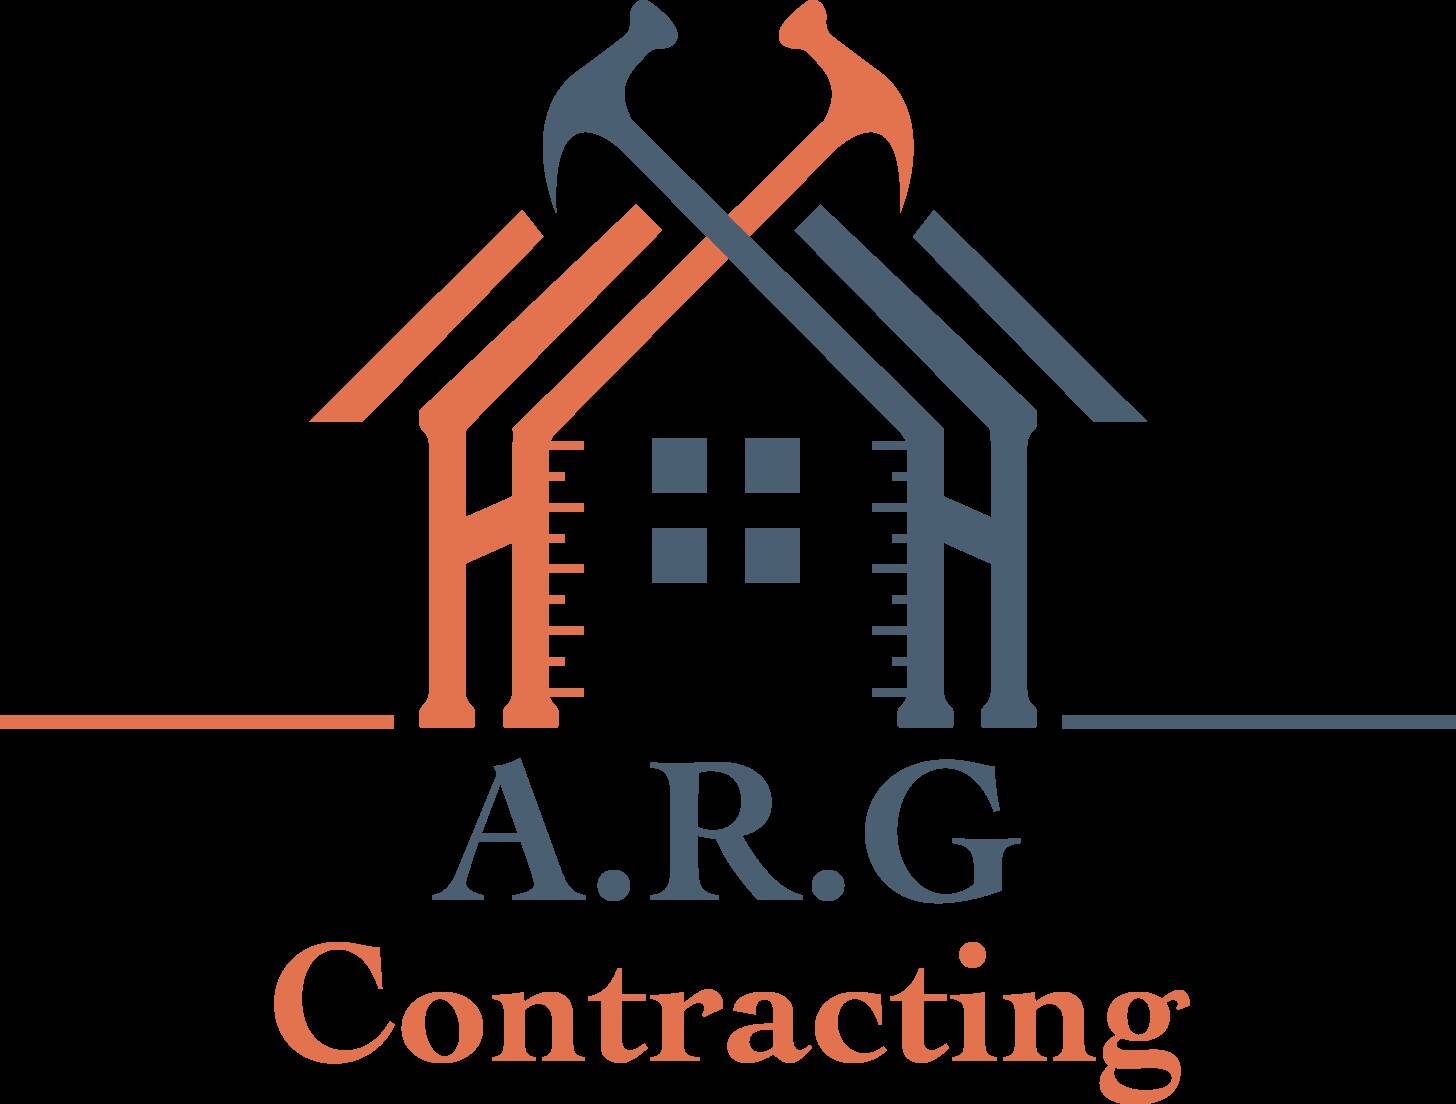 A.R.G. Contracting